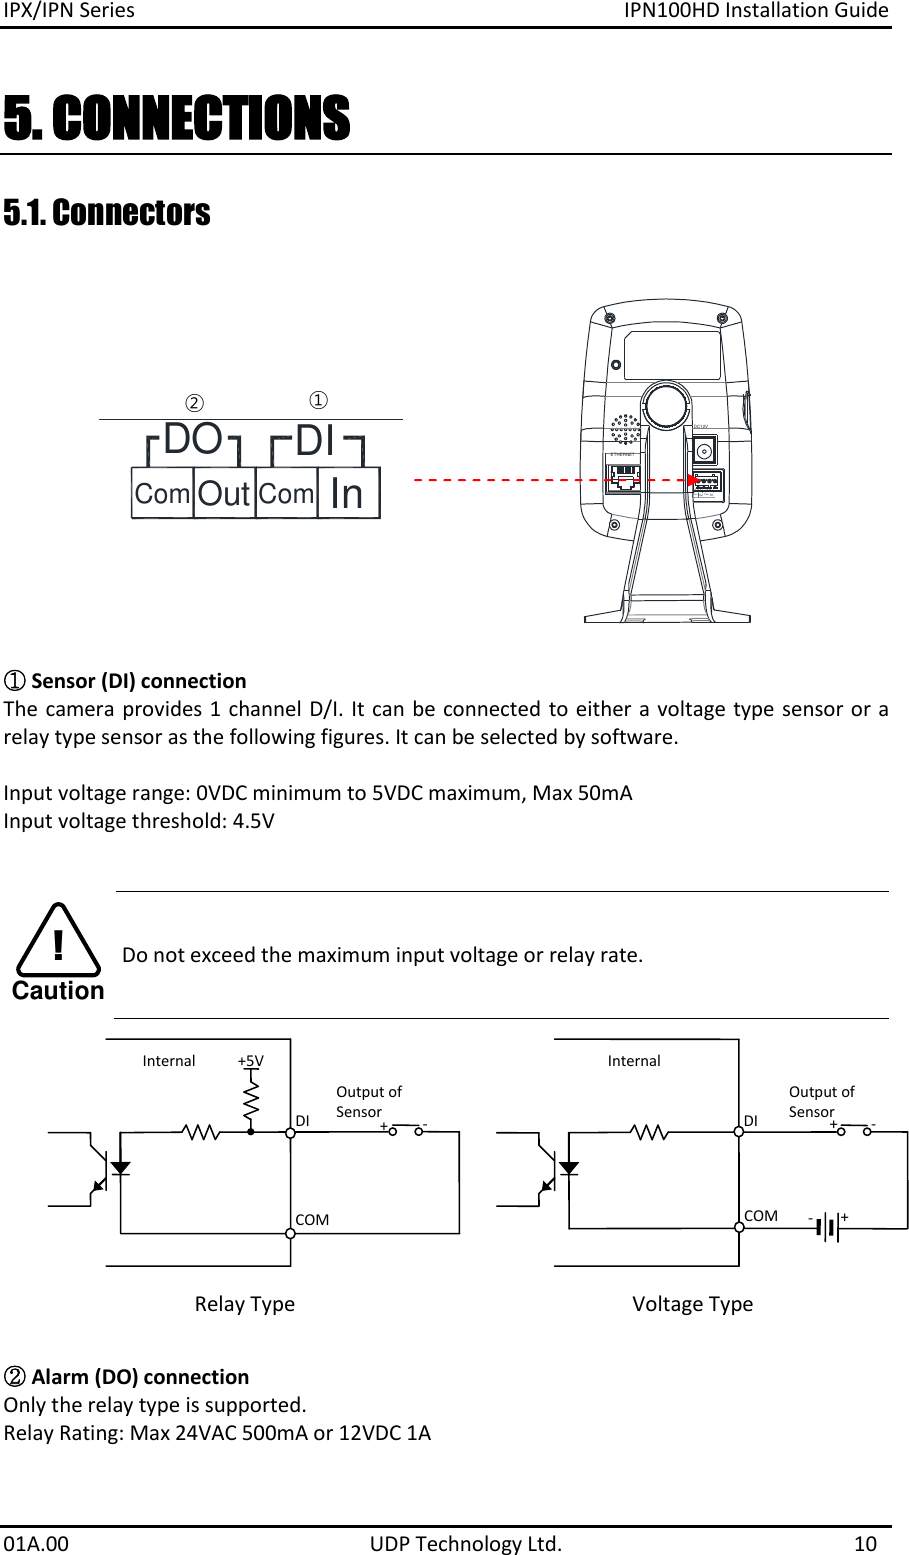 IPX/IPN Series  IPN100HD Installation Guide 01A.00    UDP Technology Ltd.  10 5. CONNECTIONS 5.1. Connectors  ① Sensor (DI) connection The camera provides 1  channel D/I. It can be connected to either a voltage type sensor or a relay type sensor as the following figures. It can be selected by software.  Input voltage range: 0VDC minimum to 5VDC maximum, Max 50mA Input voltage threshold: 4.5V   Caution! Do not exceed the maximum input voltage or relay rate.   ② Alarm (DO) connection Only the relay type is supported. Relay Rating: Max 24VAC 500mA or 12VDC 1A  +5V DI COM DI  COM + - Relay Type Voltage Type + - Output of Sensor Output of Sensor Internal Internal + - ETHERNETDO DIOut InComDC12VComETHERNETDO DIOut InComDC12VCom① ②  